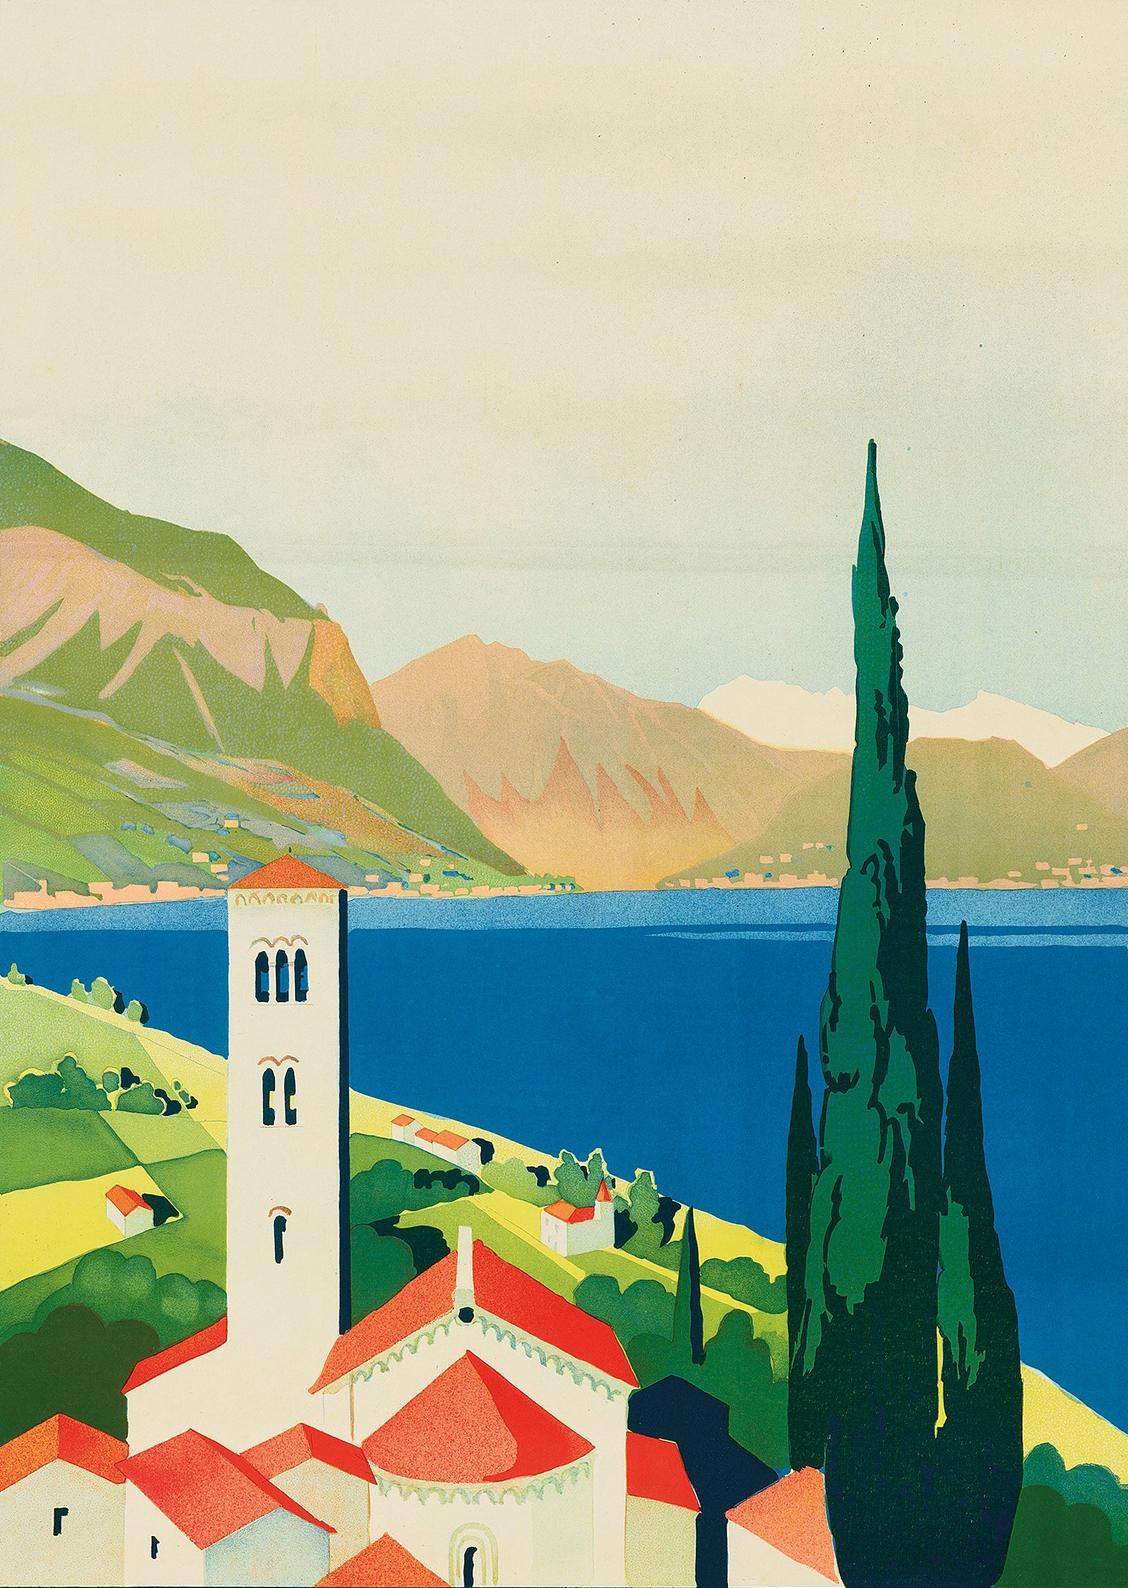 Original vintage travel poster for the Oberitalienische Seen / Northern Italian Lakes featuring a stunning Art Deco view past a tall tree and village on the coastline towards hills and mountains on the horizon across the clear blue lake below a grey